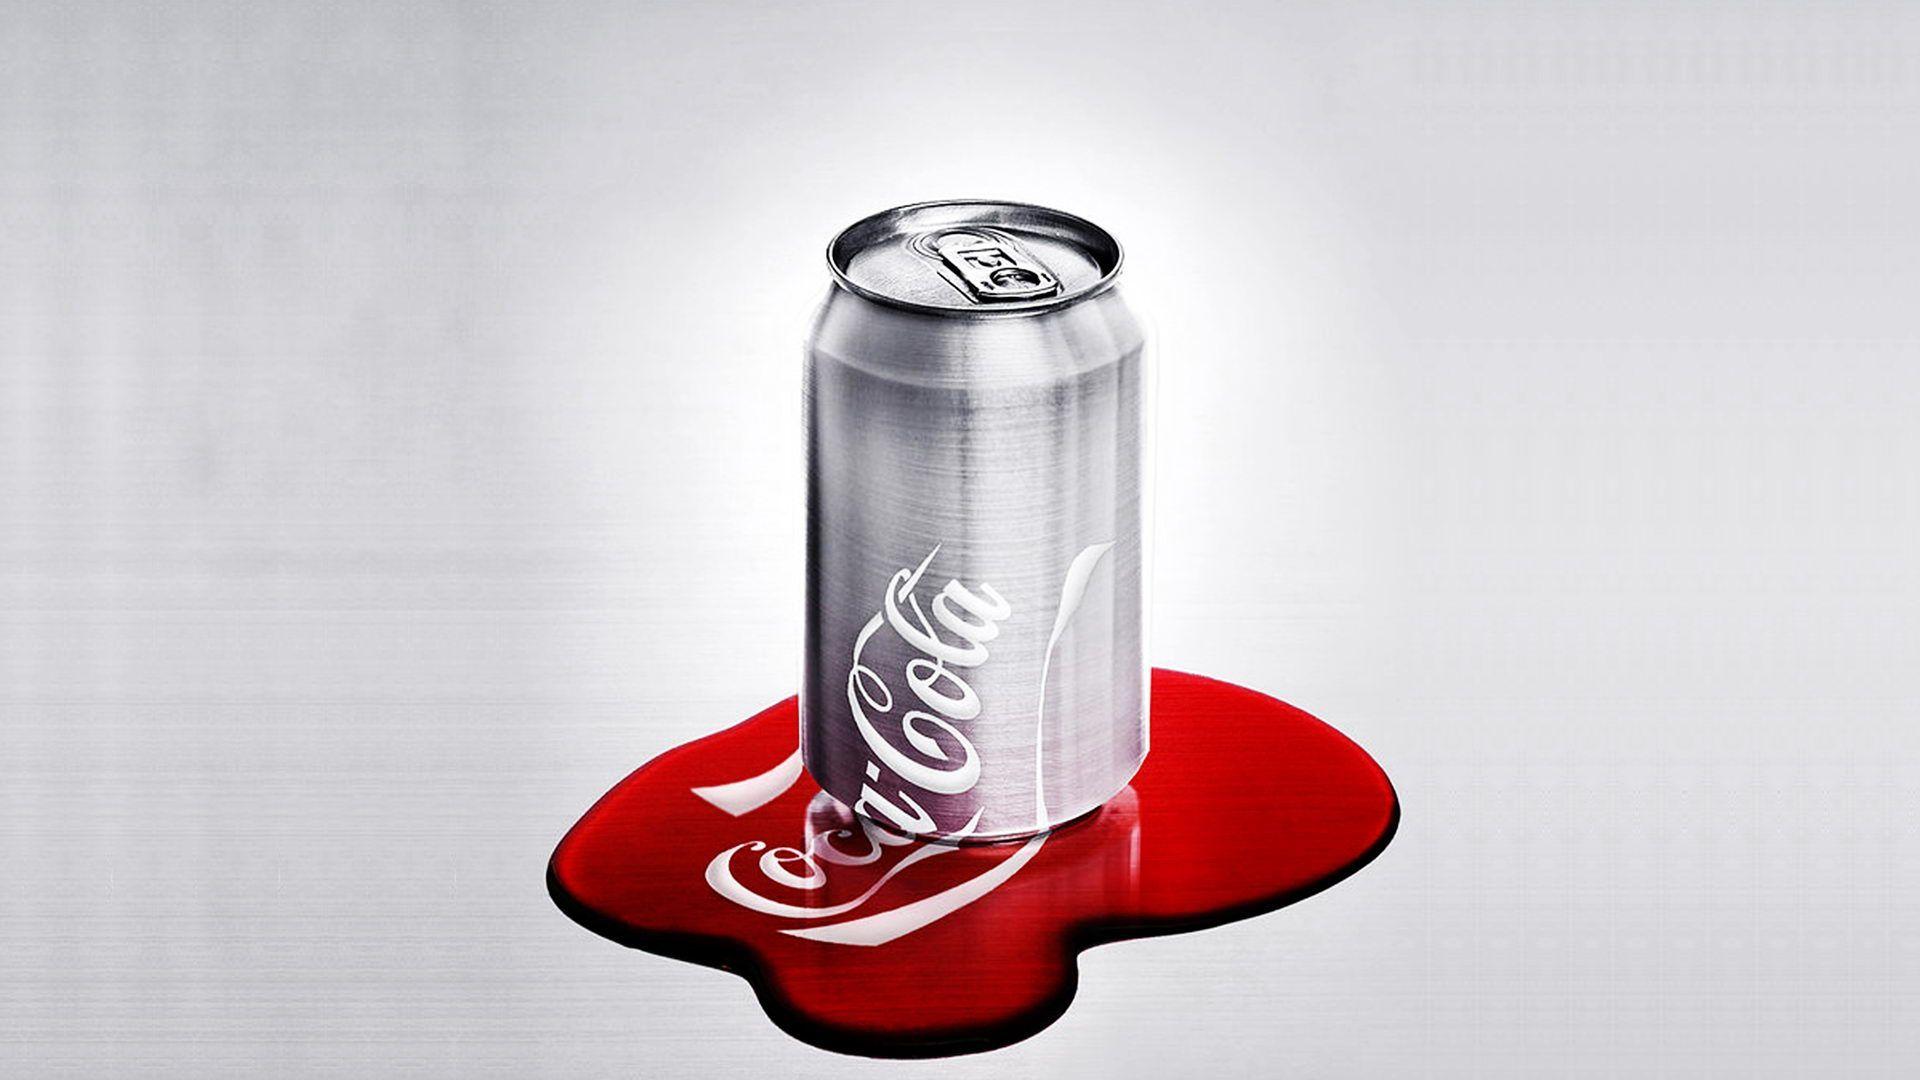 Download Coca Cola Wallpapers 2739 1920x1080 px High Resolution